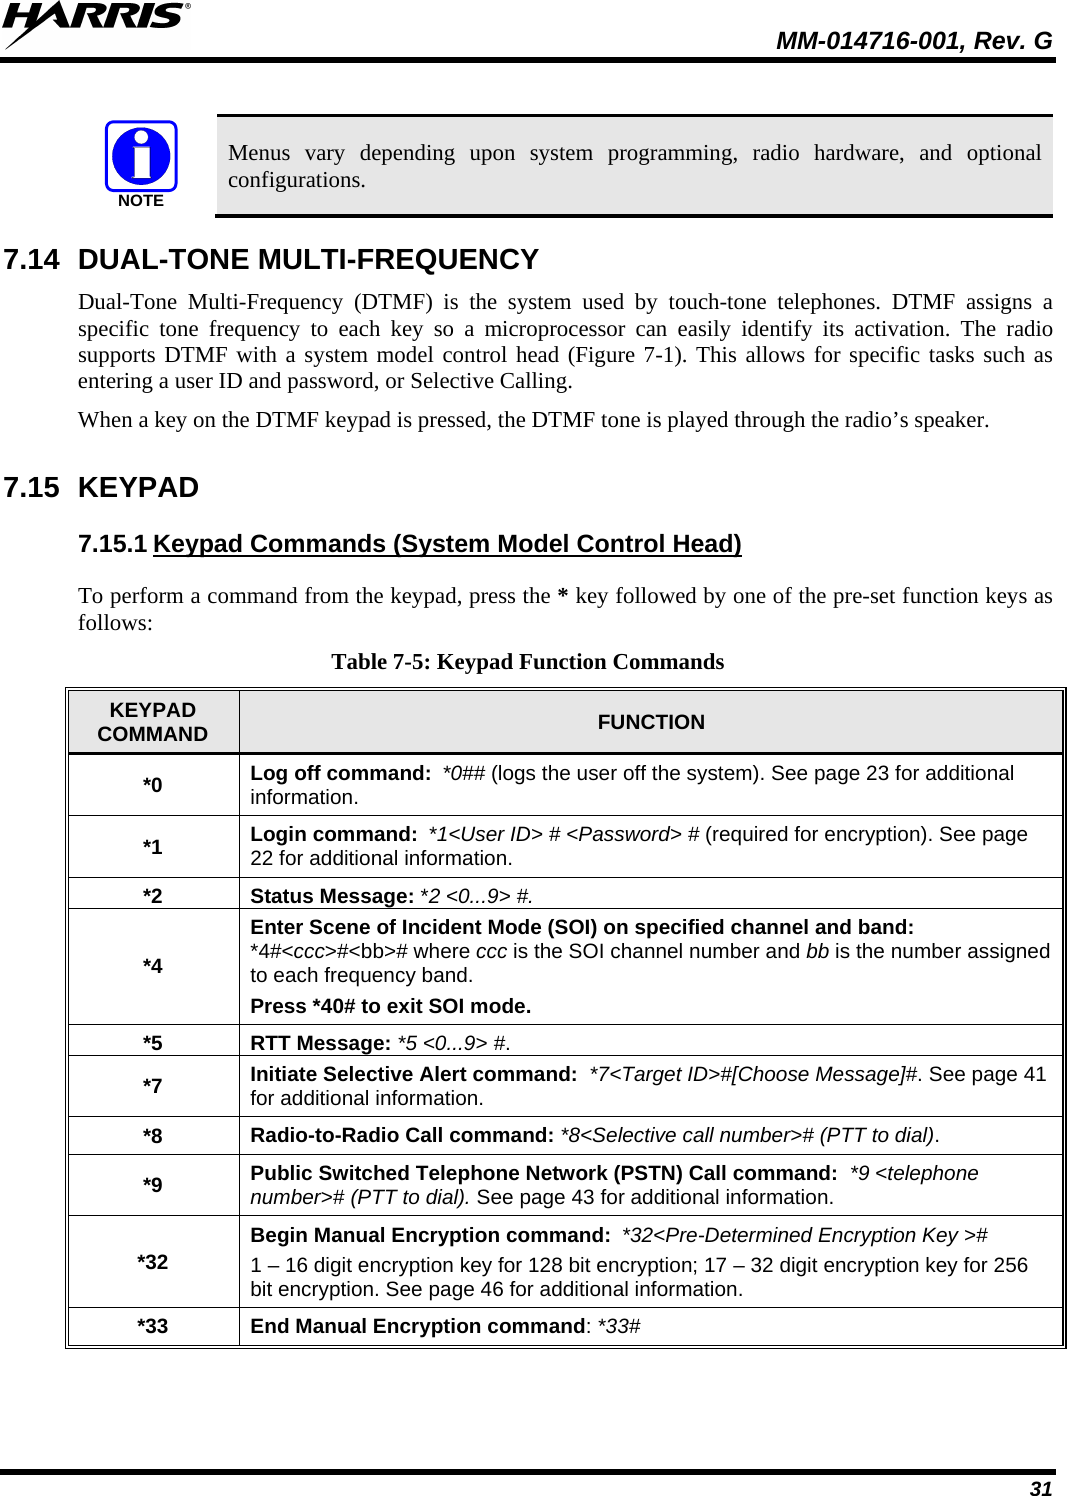  MM-014716-001, Rev. G 31  NOTE Menus vary depending upon system programming, radio hardware, and optional configurations.  7.14 DUAL-TONE MULTI-FREQUENCY Dual-Tone Multi-Frequency (DTMF) is the system used by touch-tone telephones. DTMF assigns a specific tone frequency to each key so a microprocessor can easily identify its activation. The radio supports DTMF with a system model control head (Figure 7-1). This allows for specific tasks such as entering a user ID and password, or Selective Calling. When a key on the DTMF keypad is pressed, the DTMF tone is played through the radio’s speaker. 7.15 KEYPAD 7.15.1 To perform a command from the keypad, press the * key followed by one of the pre-set function keys as follows: Keypad Commands (System Model Control Head) Table 7-5: Keypad Function Commands KEYPAD COMMAND FUNCTION *0 Log off command: *0## (logs the user off the system). See page 23 for additional information. *1 Login command: *1&lt;User ID&gt; # &lt;Password&gt; # (required for encryption). See page 22 for additional information. *2 Status Message: *2 &lt;0...9&gt; #. *4 Enter Scene of Incident Mode (SOI) on specified channel and band: *4#&lt;ccc&gt;#&lt;bb&gt;# where ccc is the SOI channel number and bb is the number assigned to each frequency band.  Press *40# to exit SOI mode. *5 RTT Message: *5 &lt;0...9&gt; #.  *7 Initiate Selective Alert command:  *7&lt;Target ID&gt;#[Choose Message]#. See page 41 for additional information. *8 Radio-to-Radio Call command: *8&lt;Selective call number&gt;# (PTT to dial).  *9 Public Switched Telephone Network (PSTN) Call command:  *9 &lt;telephone number&gt;# (PTT to dial). See page 43 for additional information. *32 Begin Manual Encryption command: *32&lt;Pre-Determined Encryption Key &gt;#  1 – 16 digit encryption key for 128 bit encryption; 17 – 32 digit encryption key for 256 bit encryption. See page 46 for additional information. *33 End Manual Encryption command: *33# 